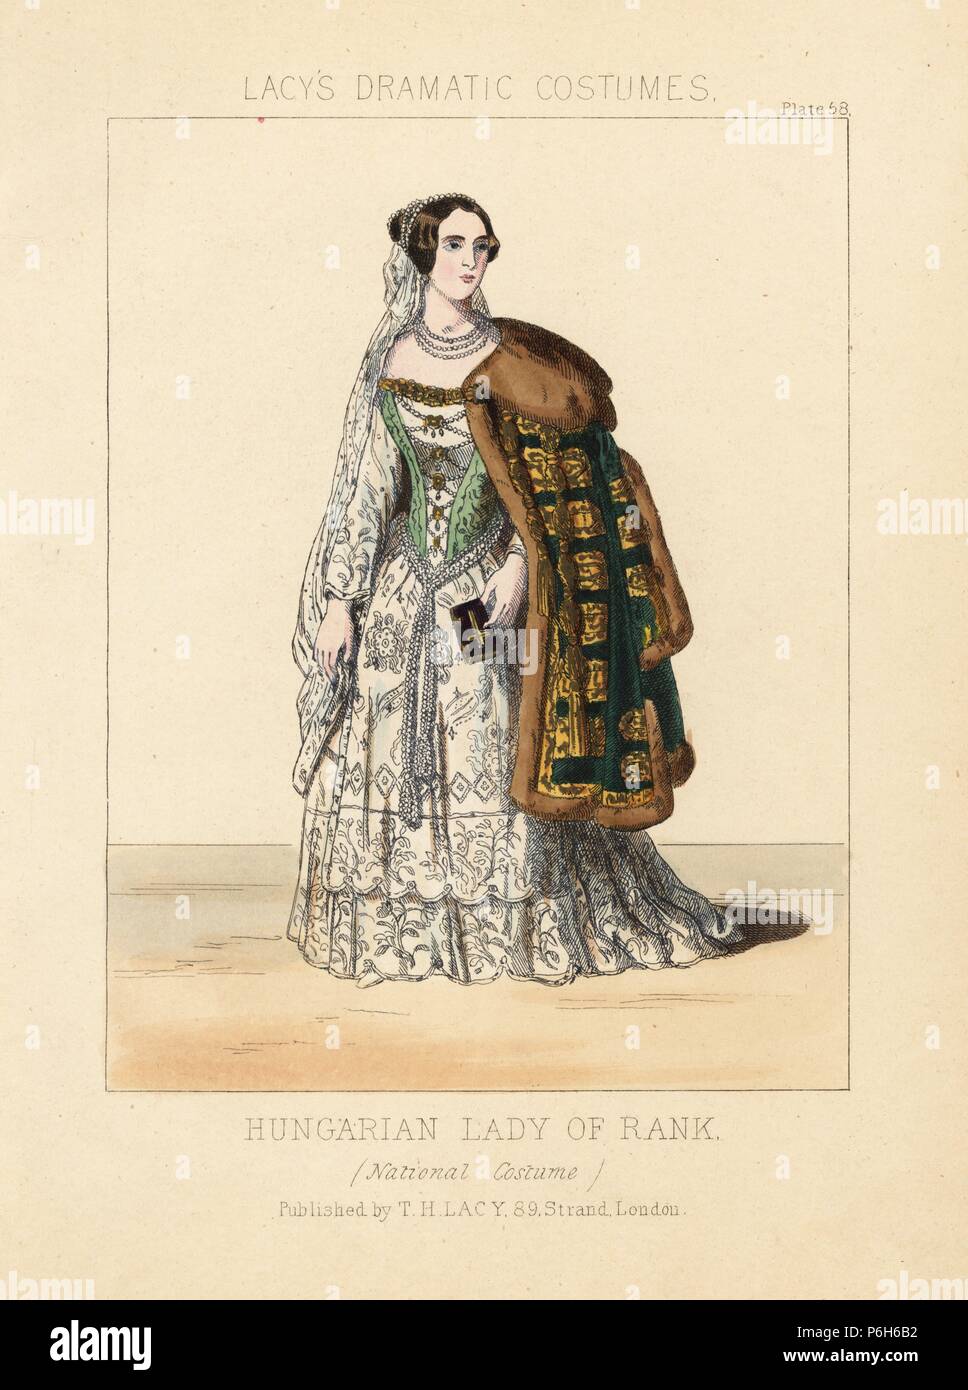 Hungarian lady of rank in national costume, 19th century. Handcoloured lithograph from Thomas Hailes Lacy's 'Female Costumes Historical, National and Dramatic in 200 Plates,' London, 1865. Lacy (1809-1873) was a British actor, playwright, theatrical manager and publisher. Stock Photo